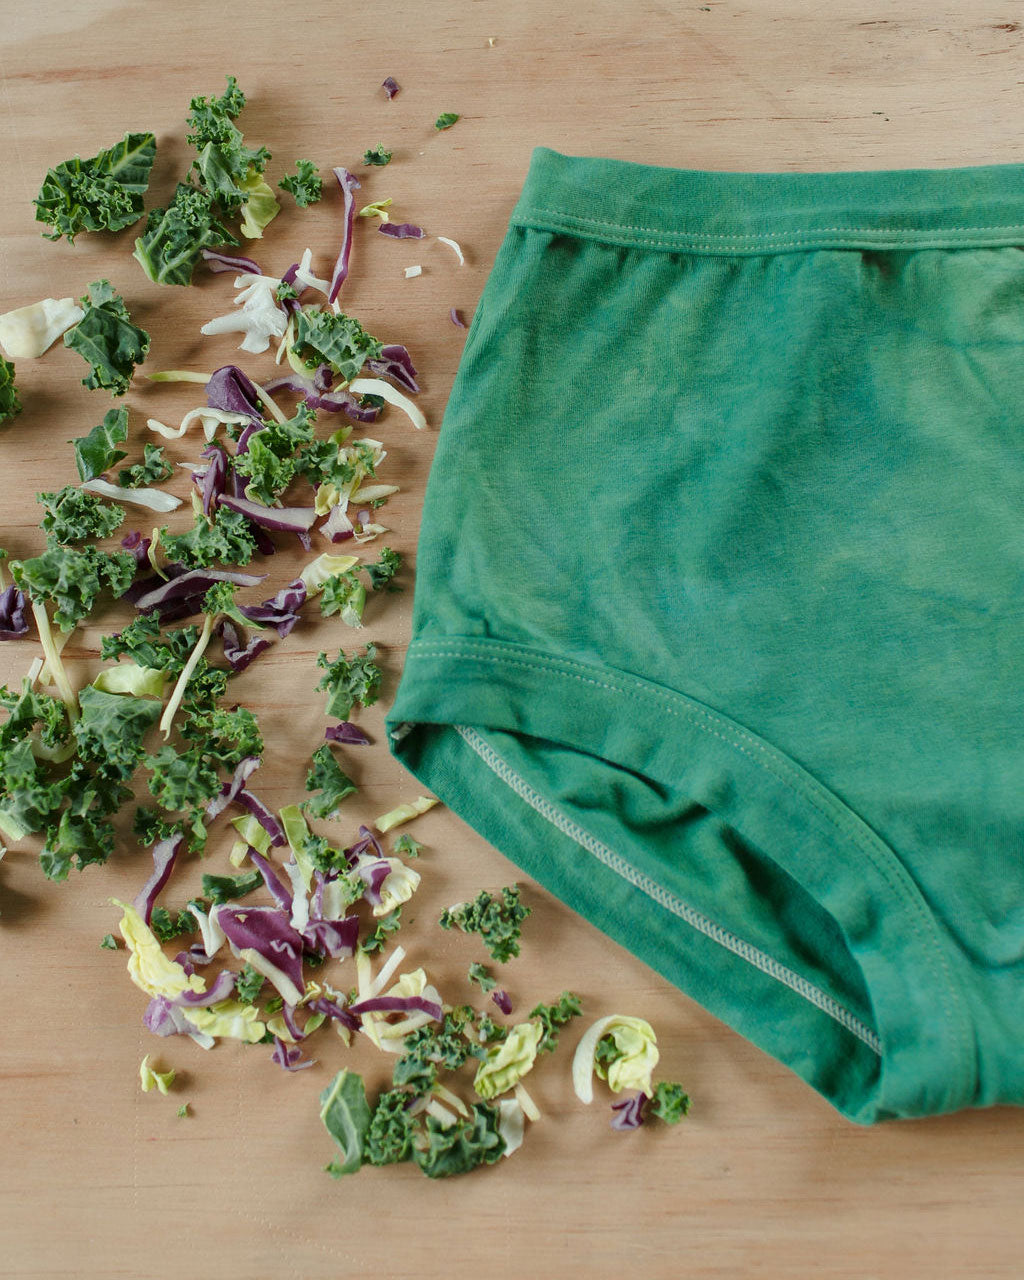 Flat lay of Thunderpants Organic Cotton Original style underwear in hand dyed Emerald color with kale around it.